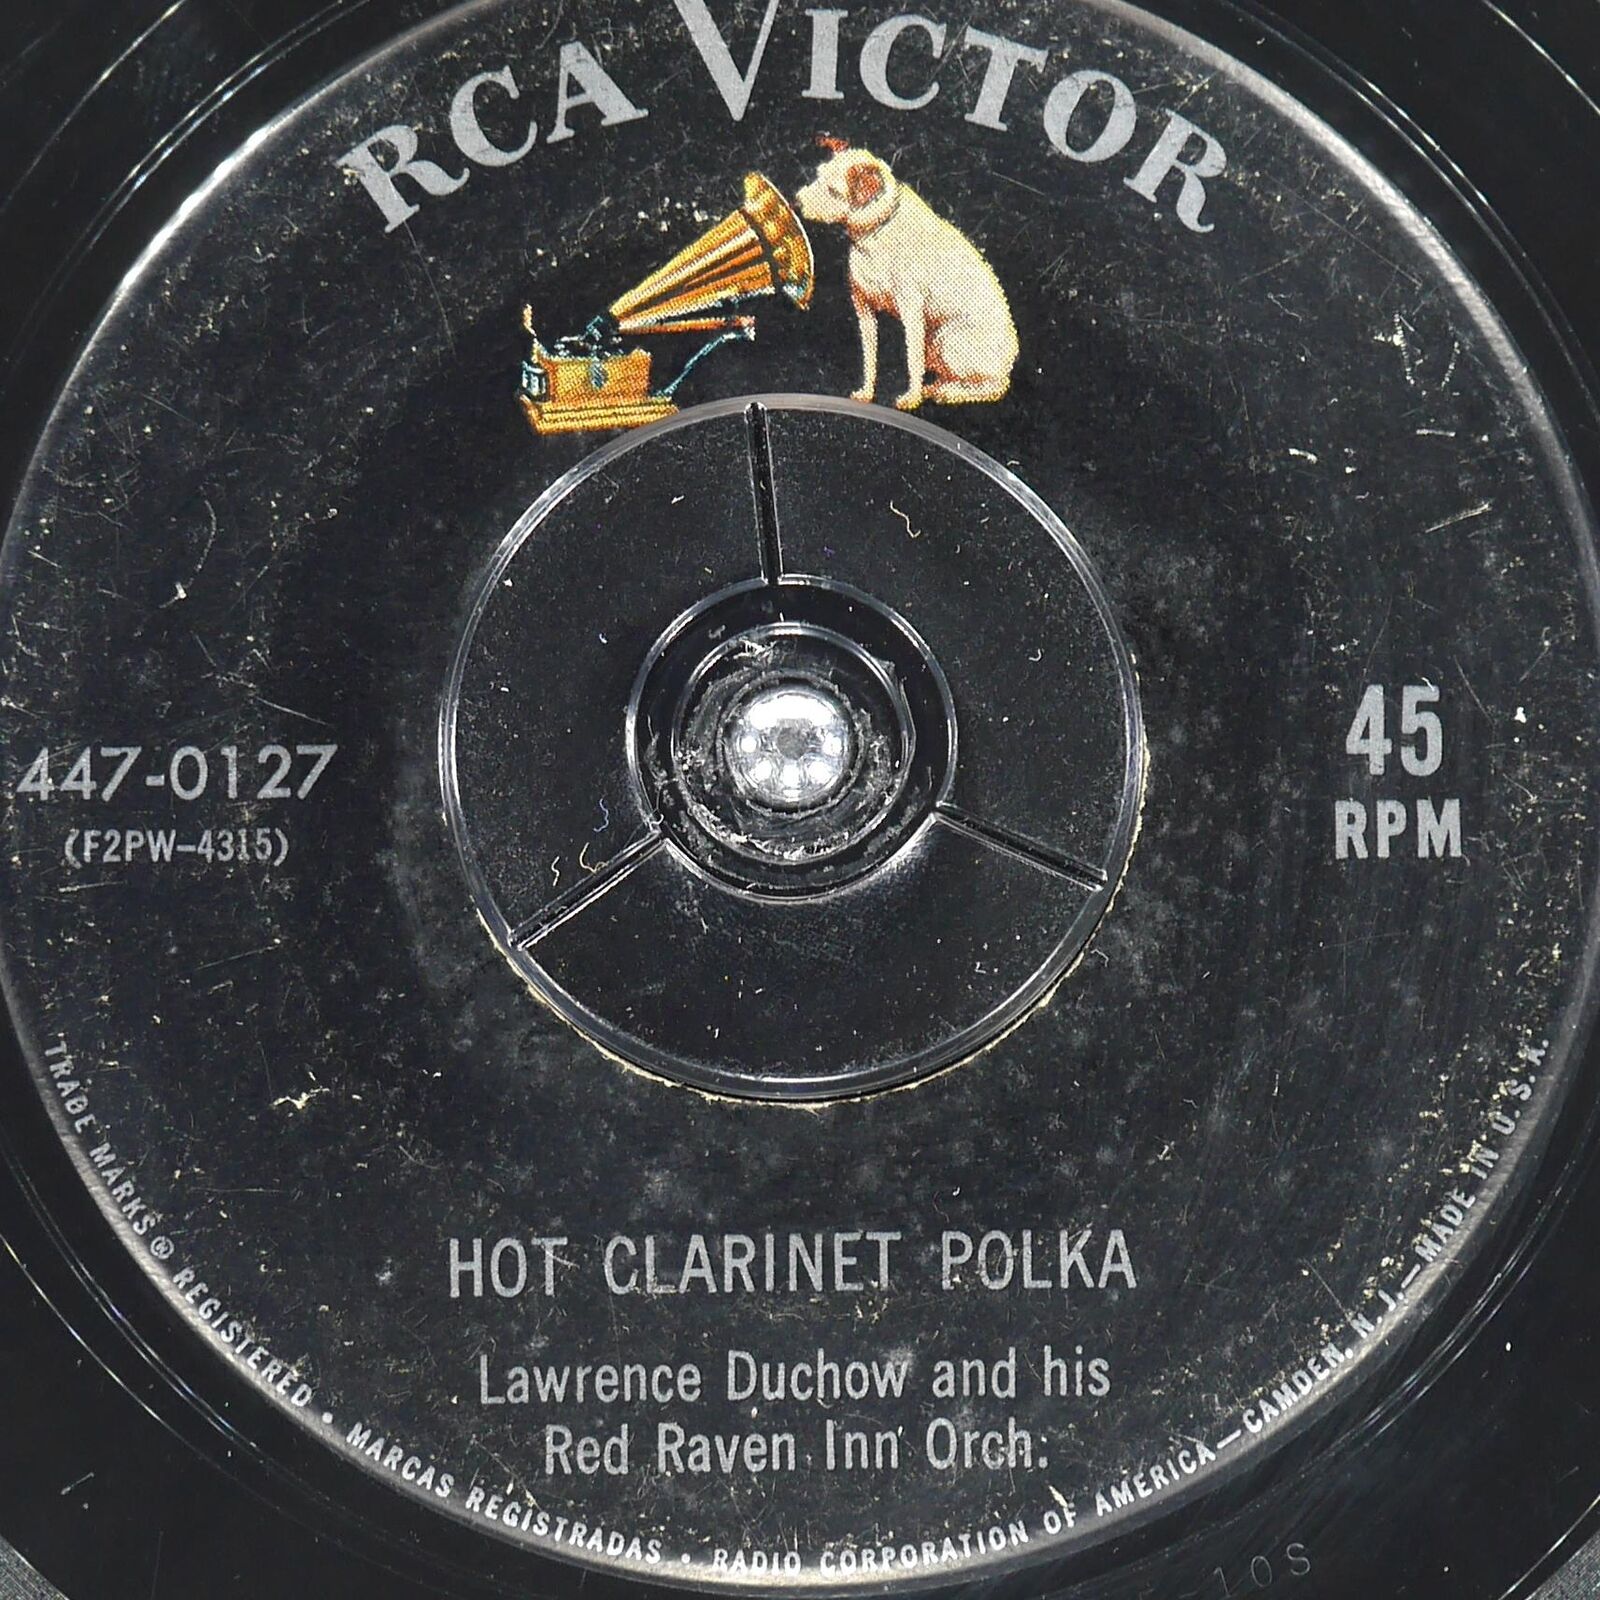 LAWRENCE DUCHOW Hot Clarinet Polka RCA VICTOR 447-0127 VG- 45rpm 7